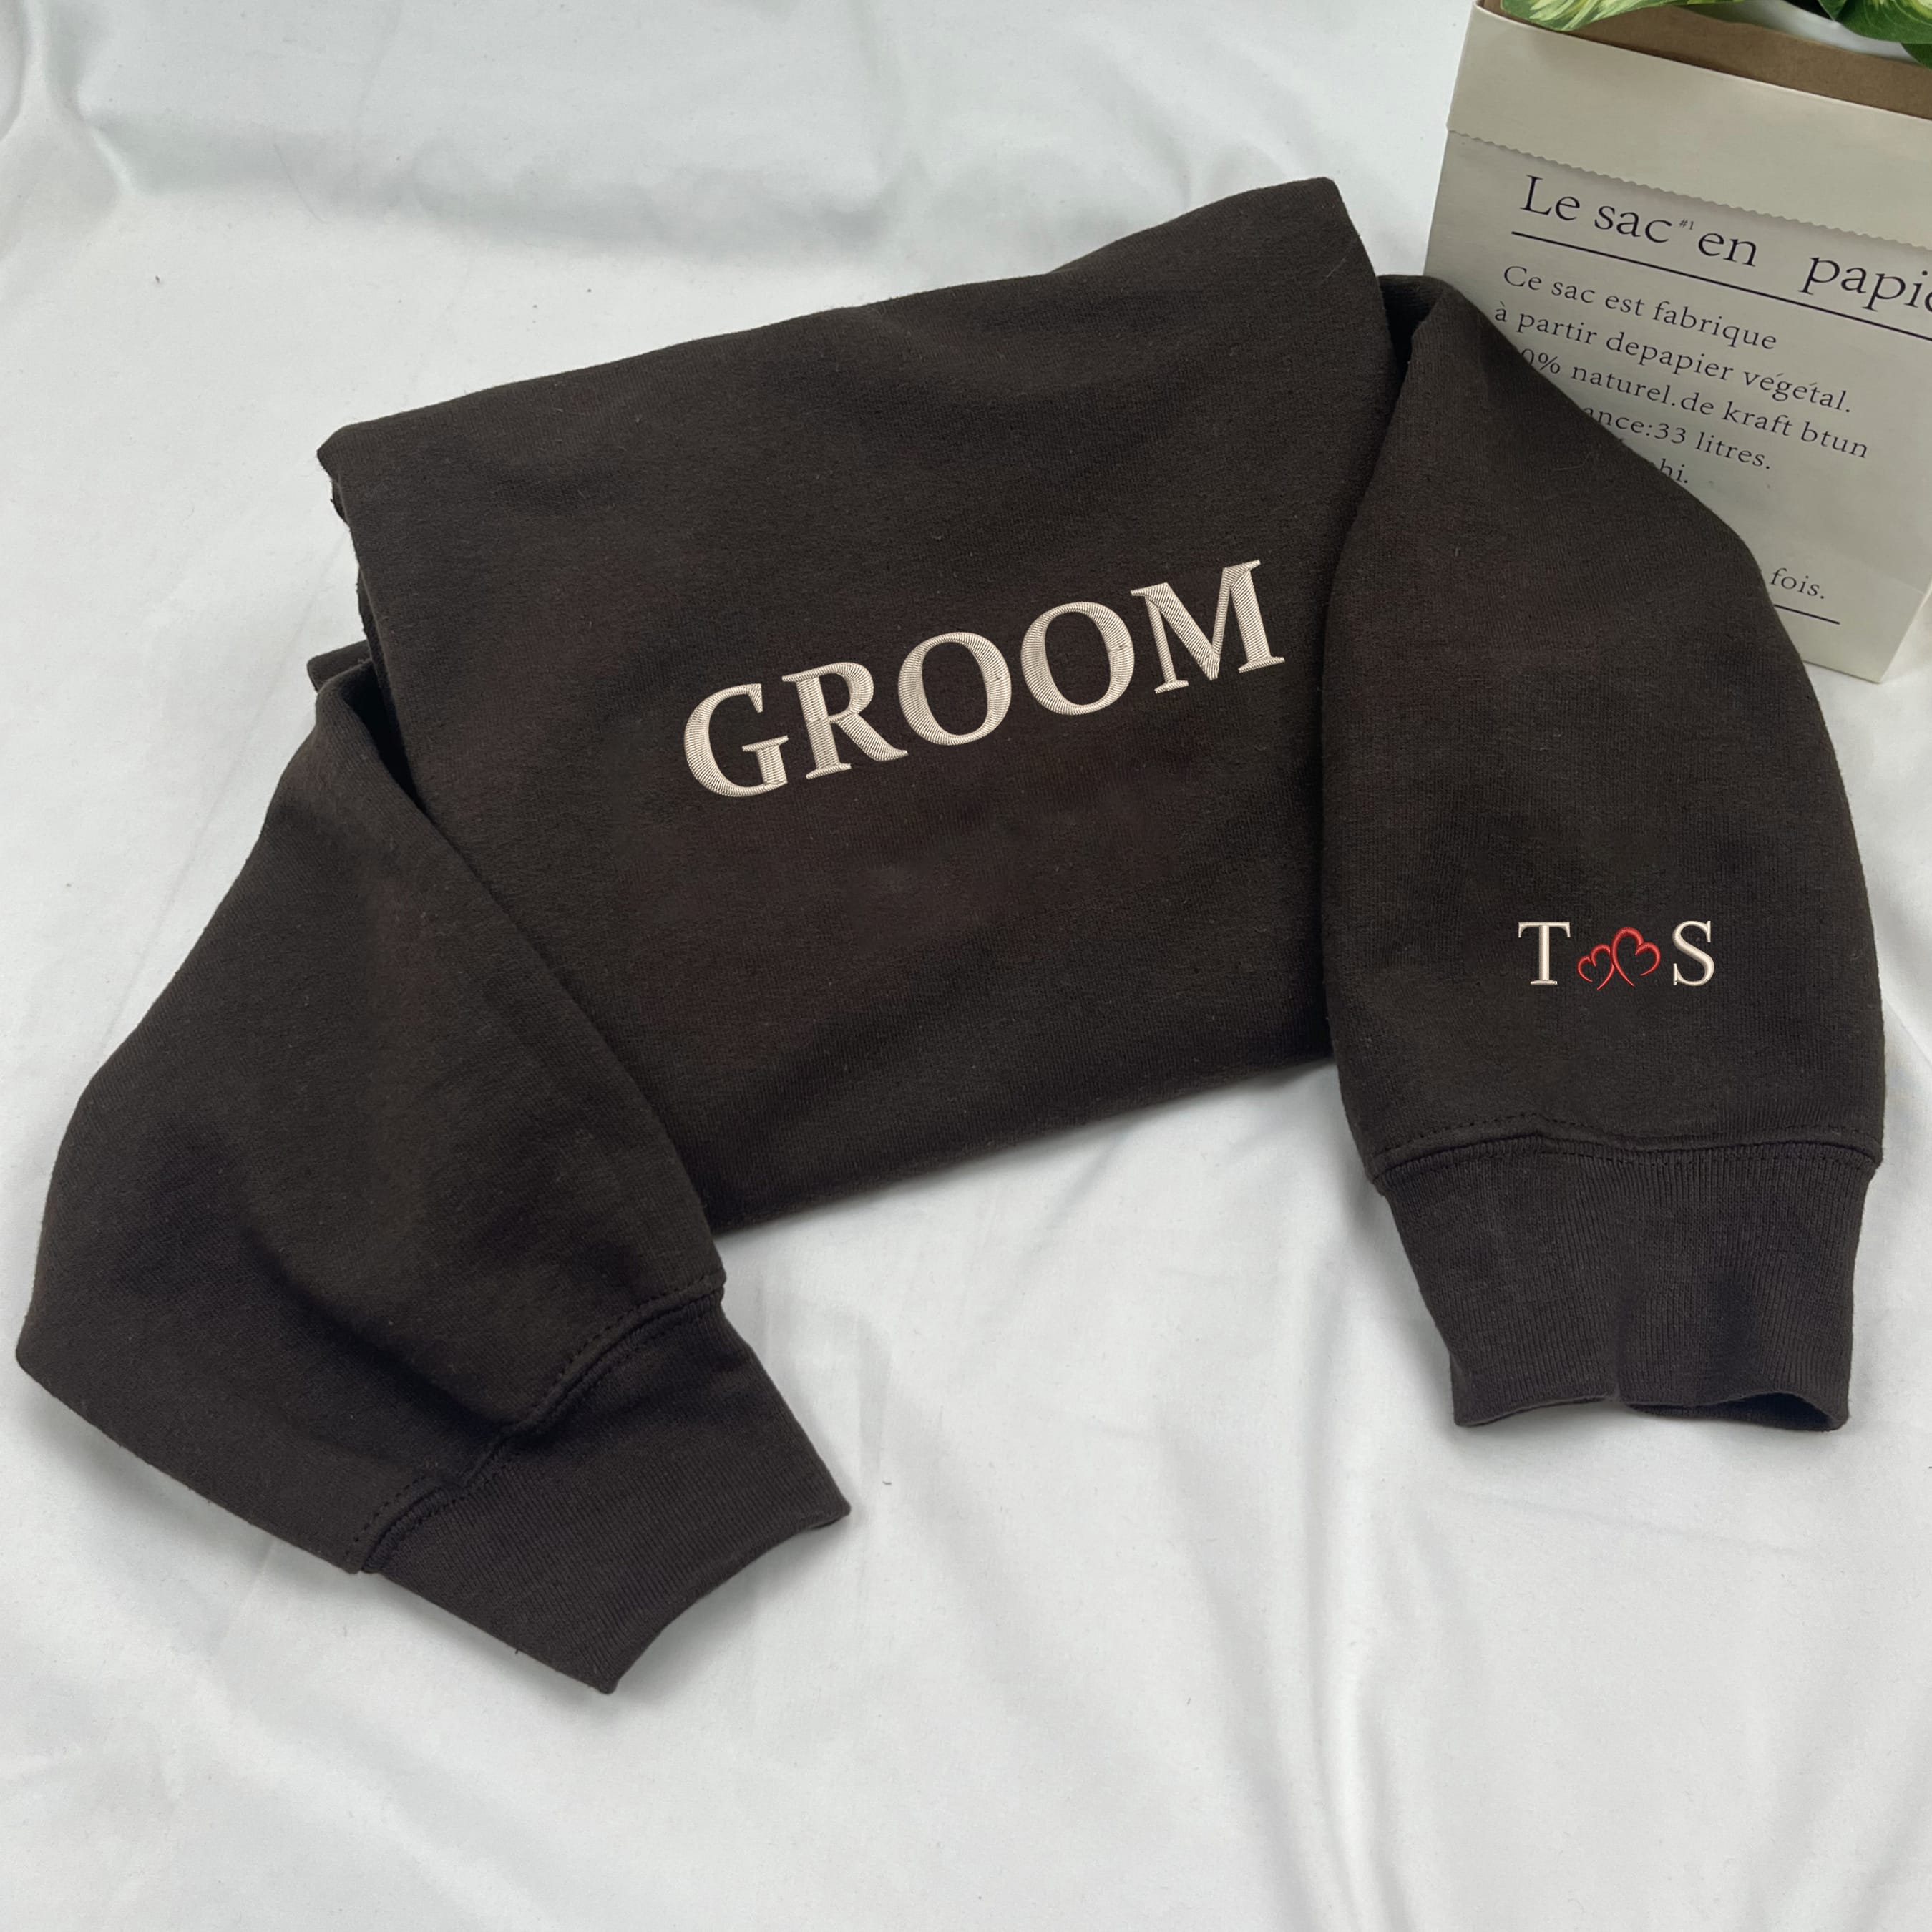 Groom Gift From Bride on Wedding Day, Gift for Groom, Groom Gift Box, Groom  Gifts From the Bride, Groom Survival Kit - Etsy